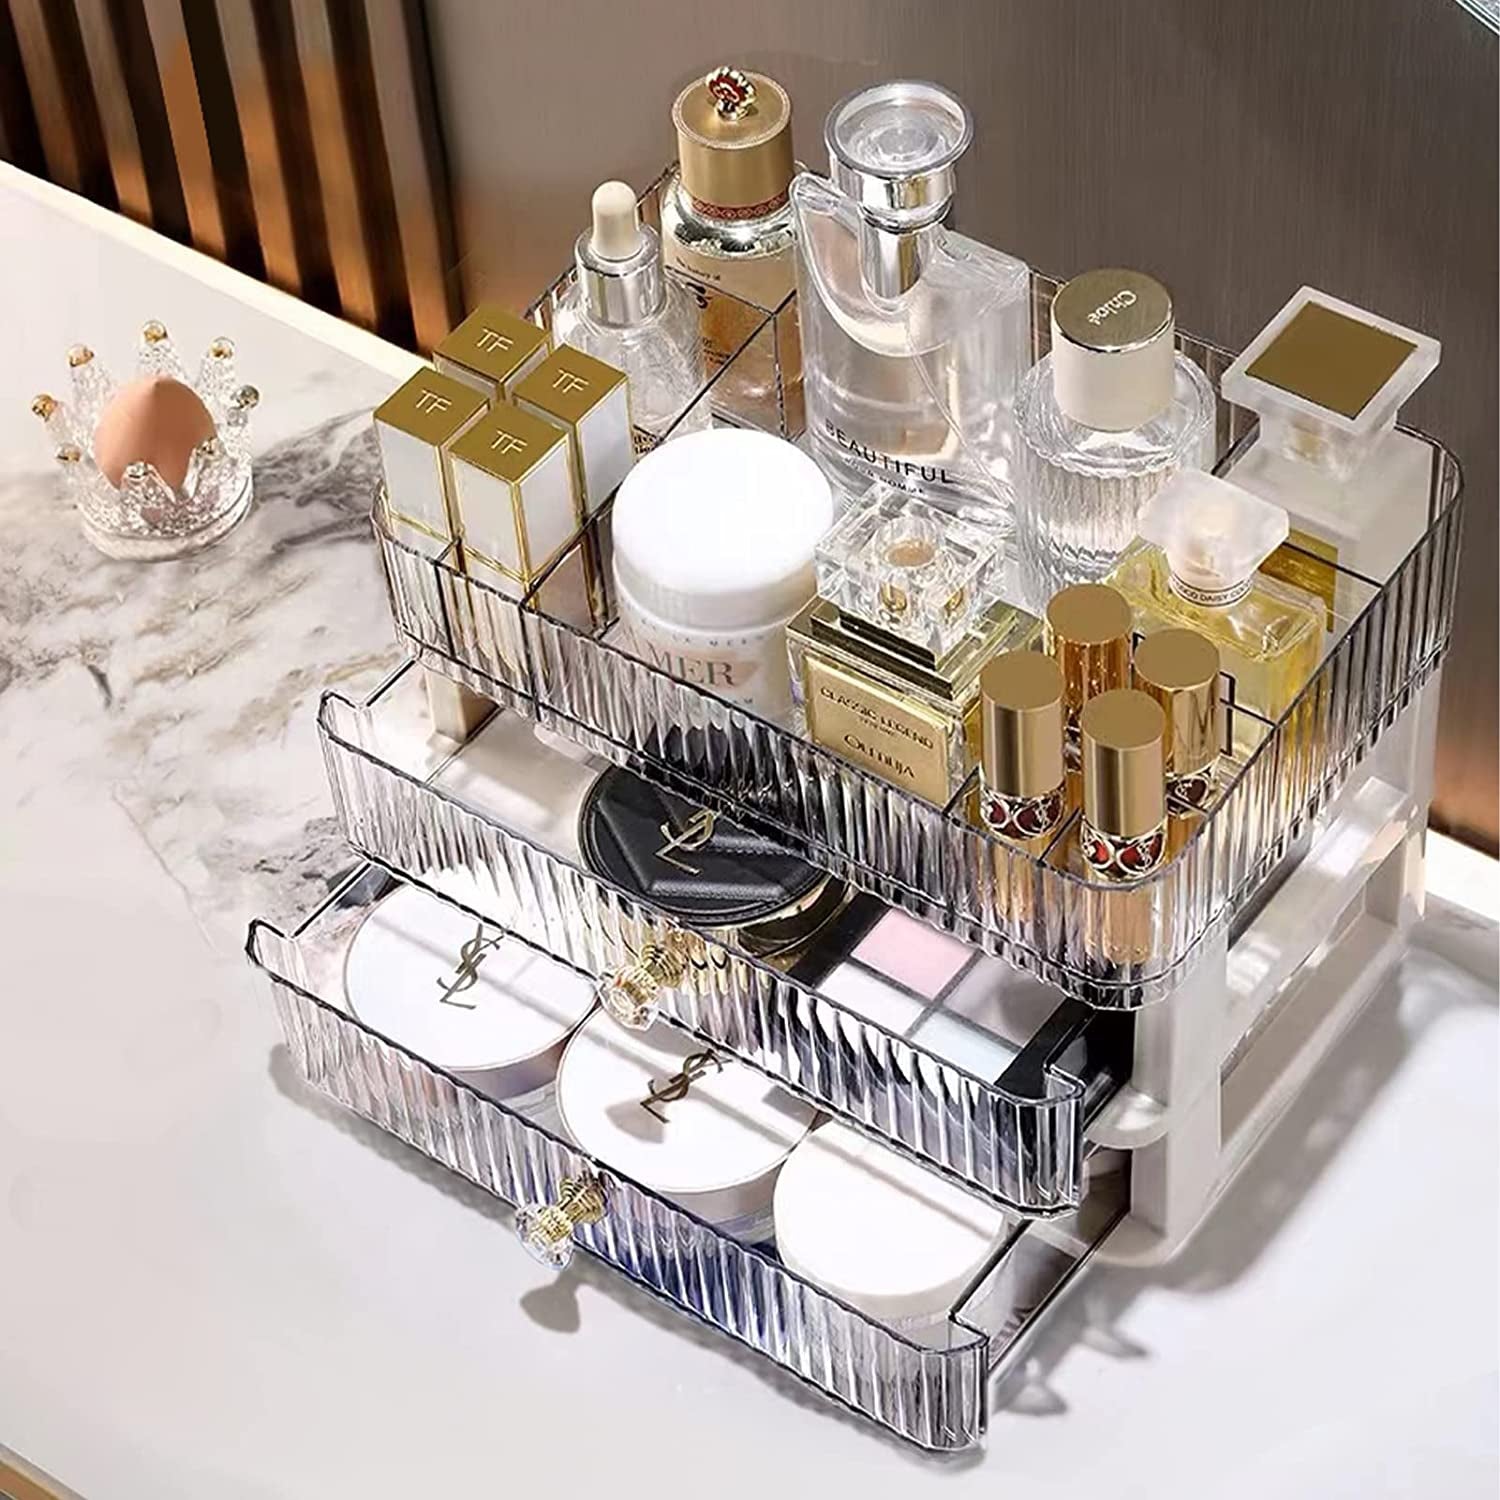 Blushbees® 2-Drawer Makeup Organizer for Bathroom and Bedroom Vanity Countertops